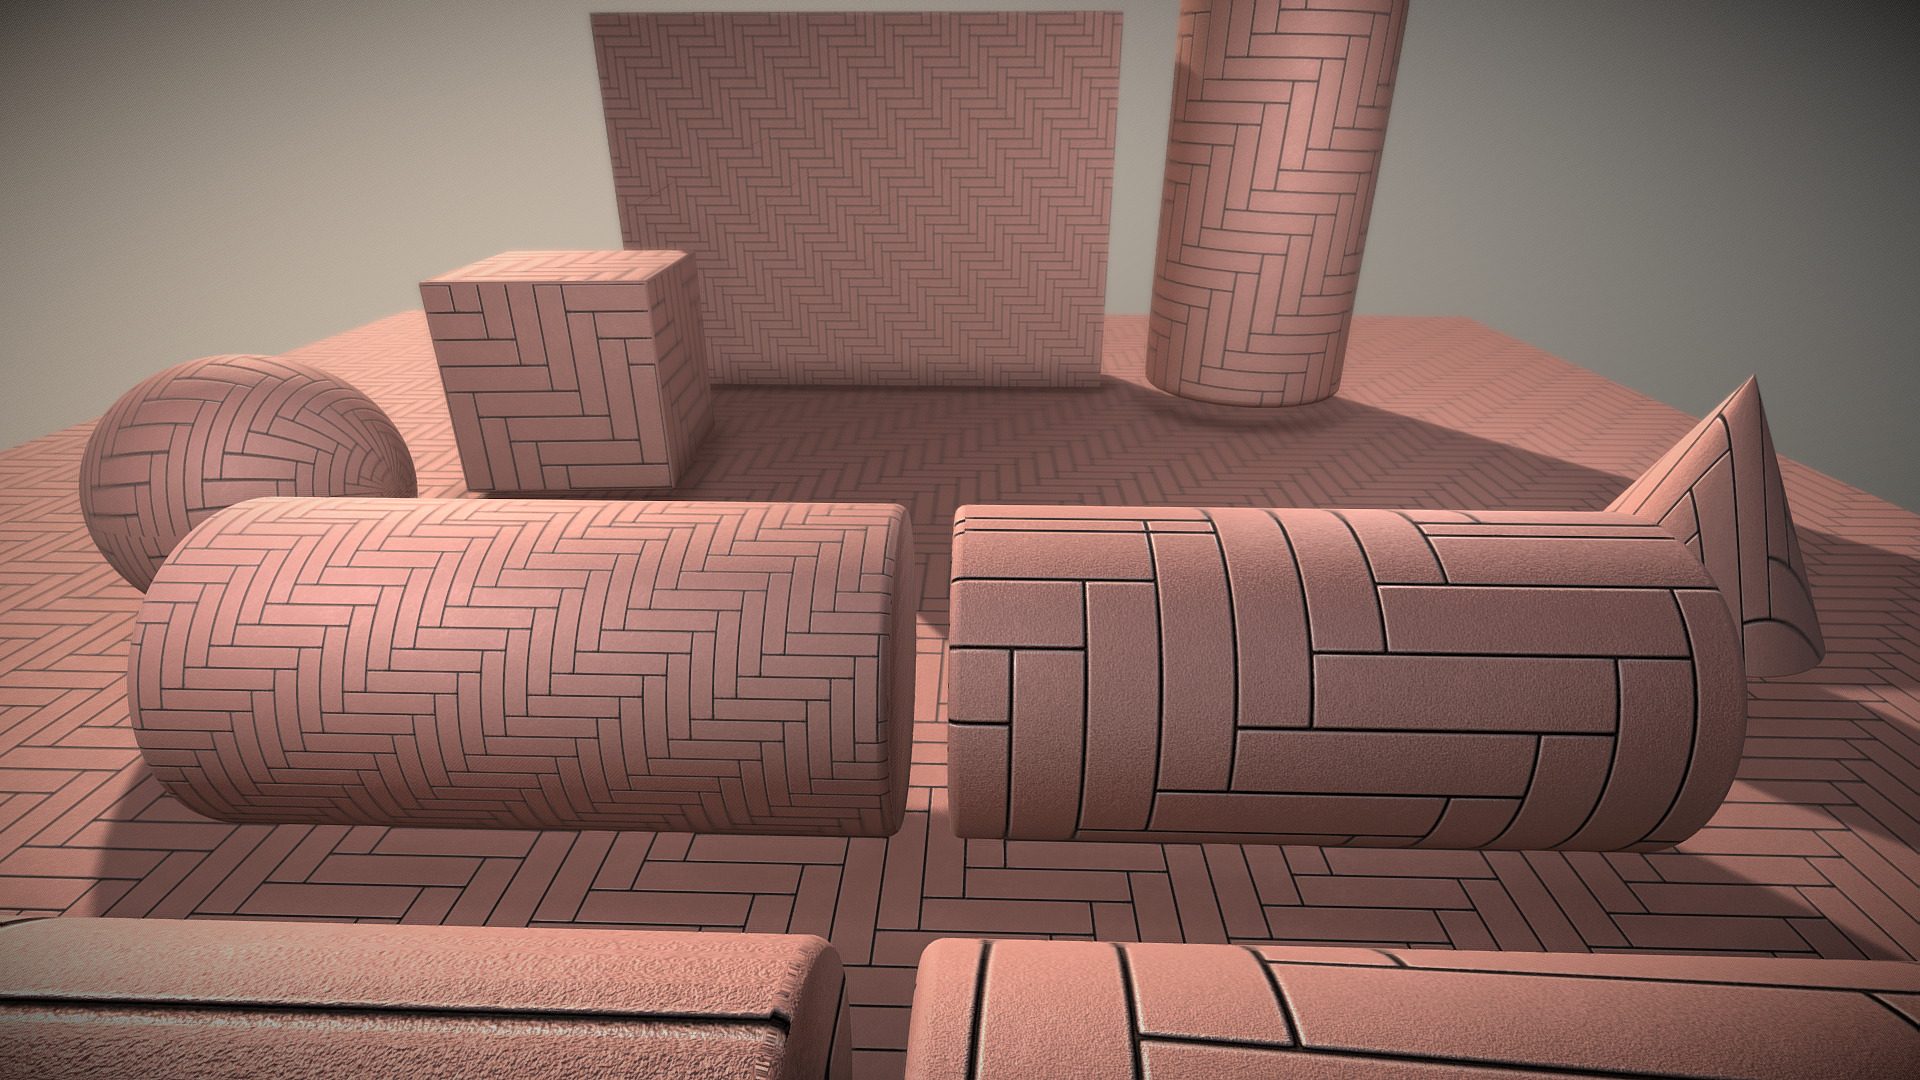 3D model Cobblestone 13 (Fishbone) Texture Set (33) - This is a 3D model of the Cobblestone 13 (Fishbone) Texture Set (33). The 3D model is about a group of couches.